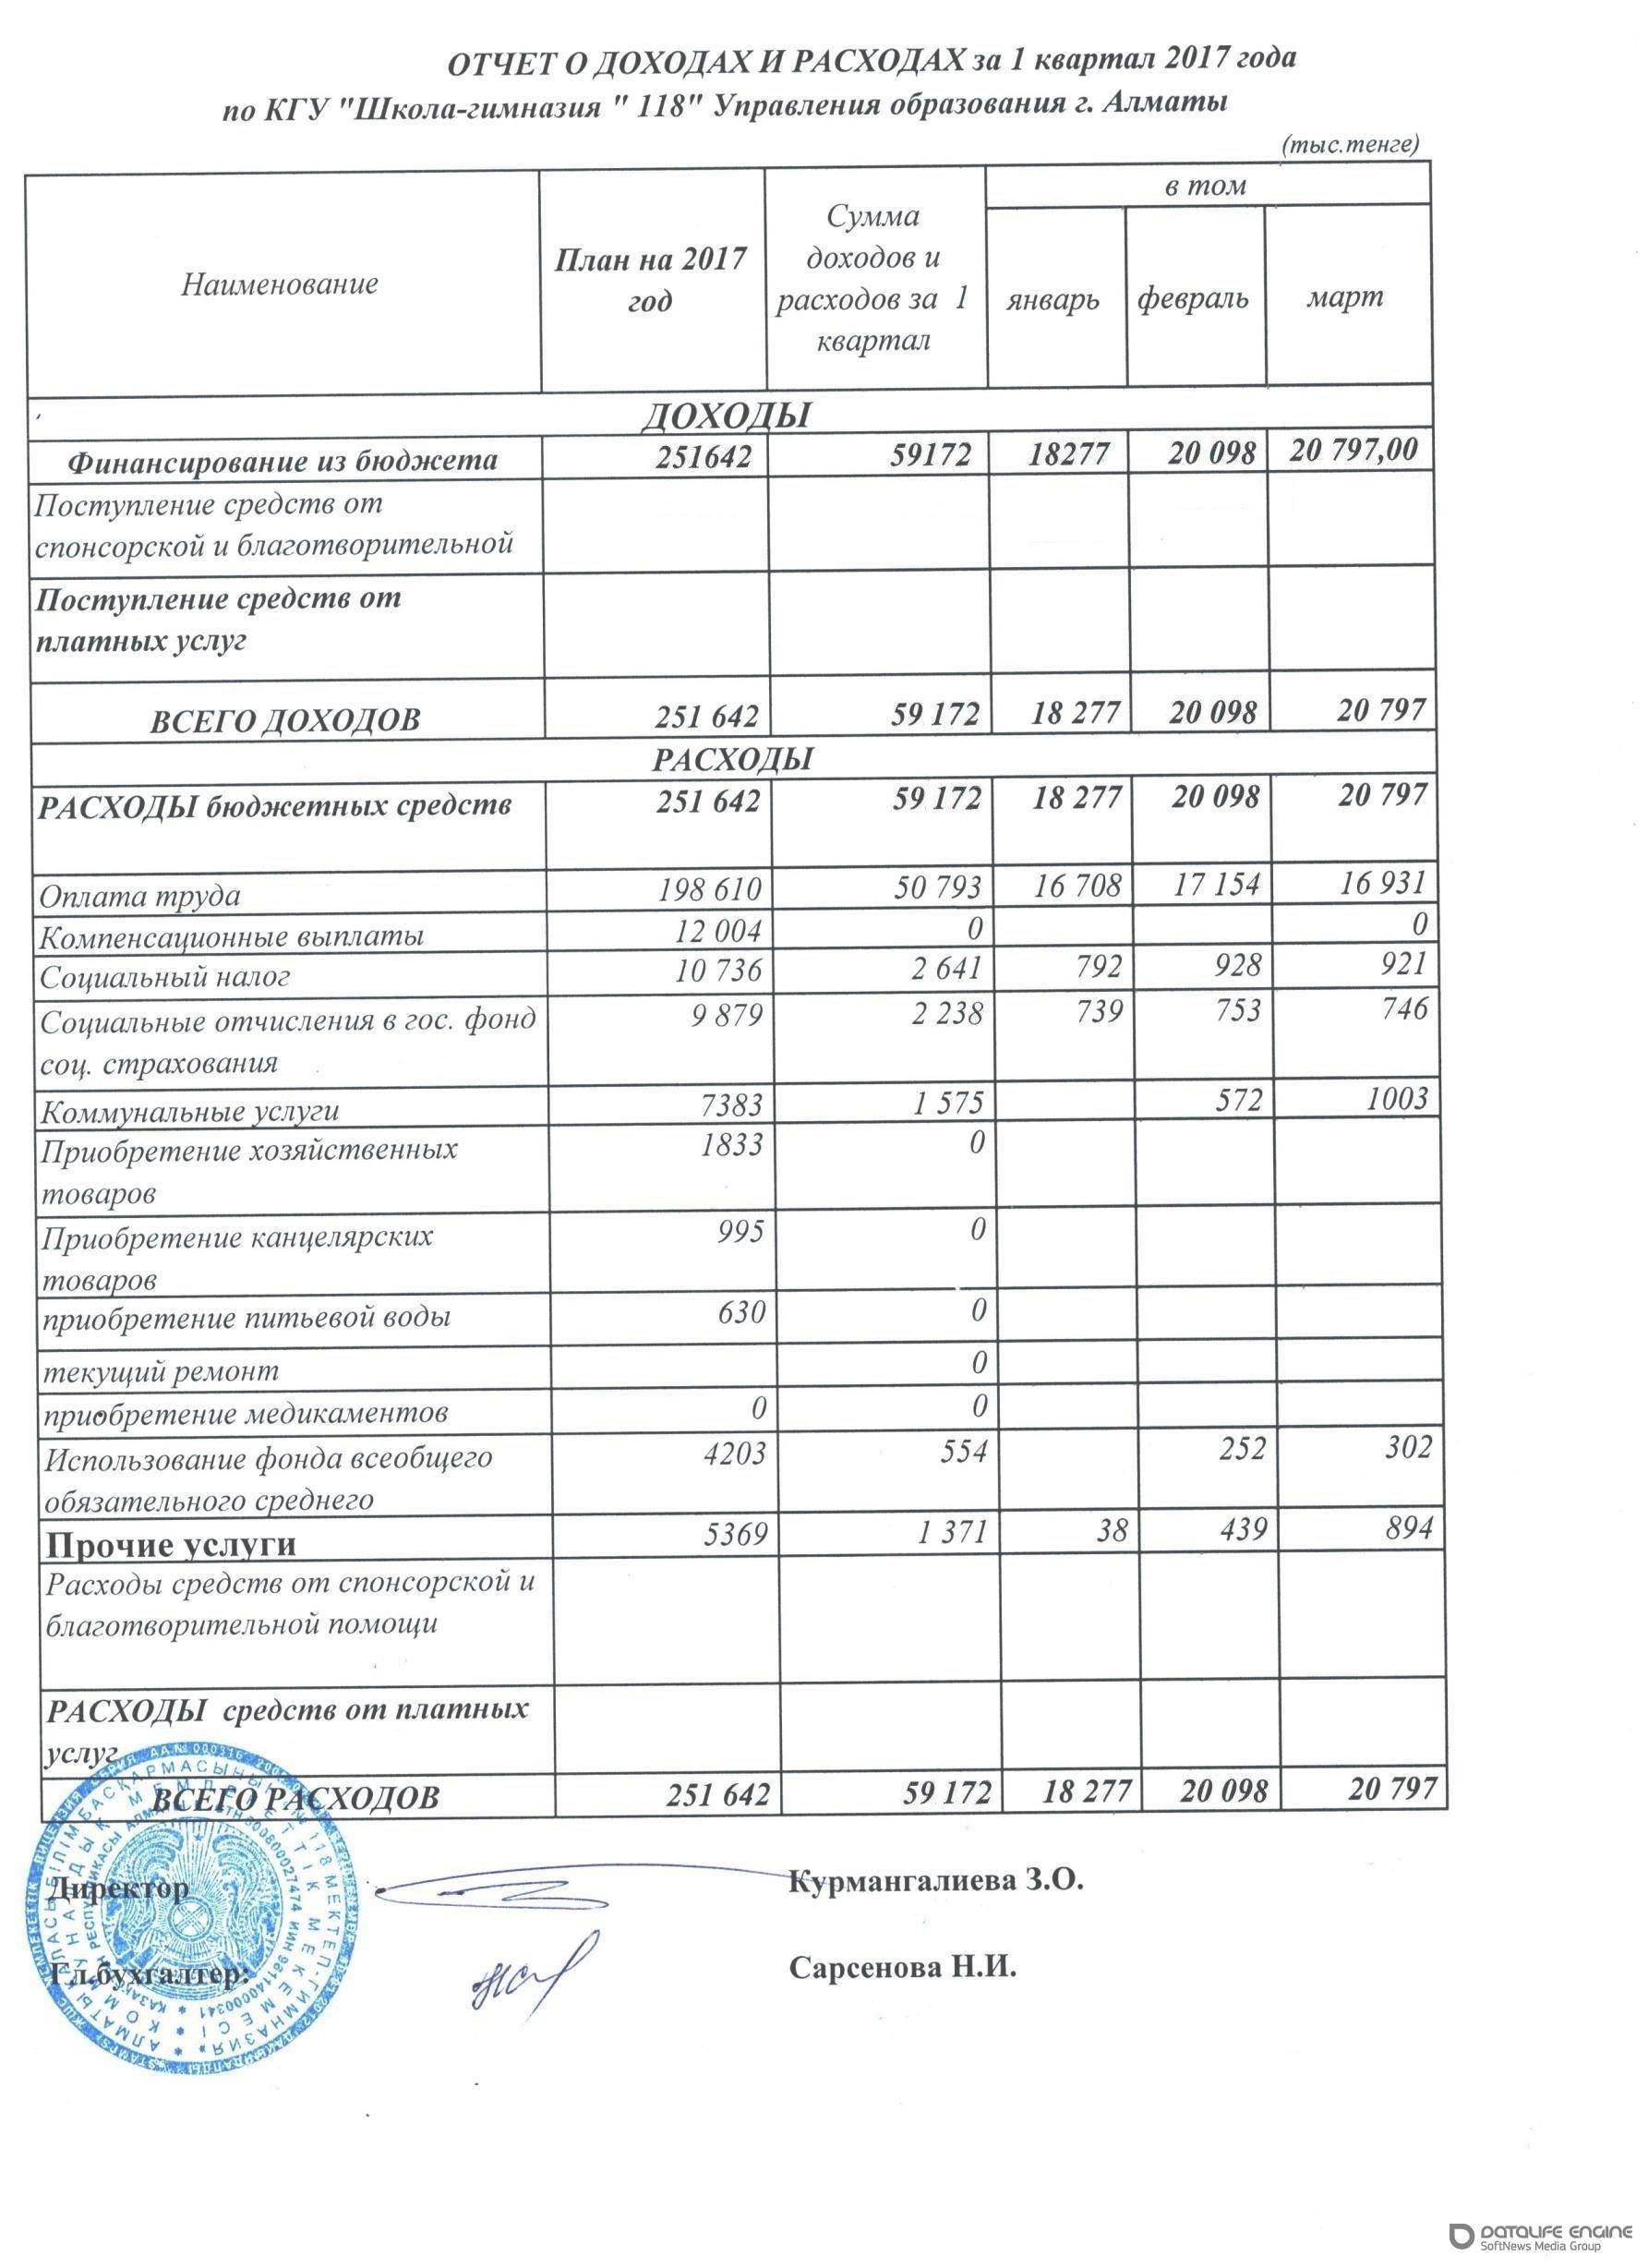 Statement of income and expenses за I квартал 2017 года